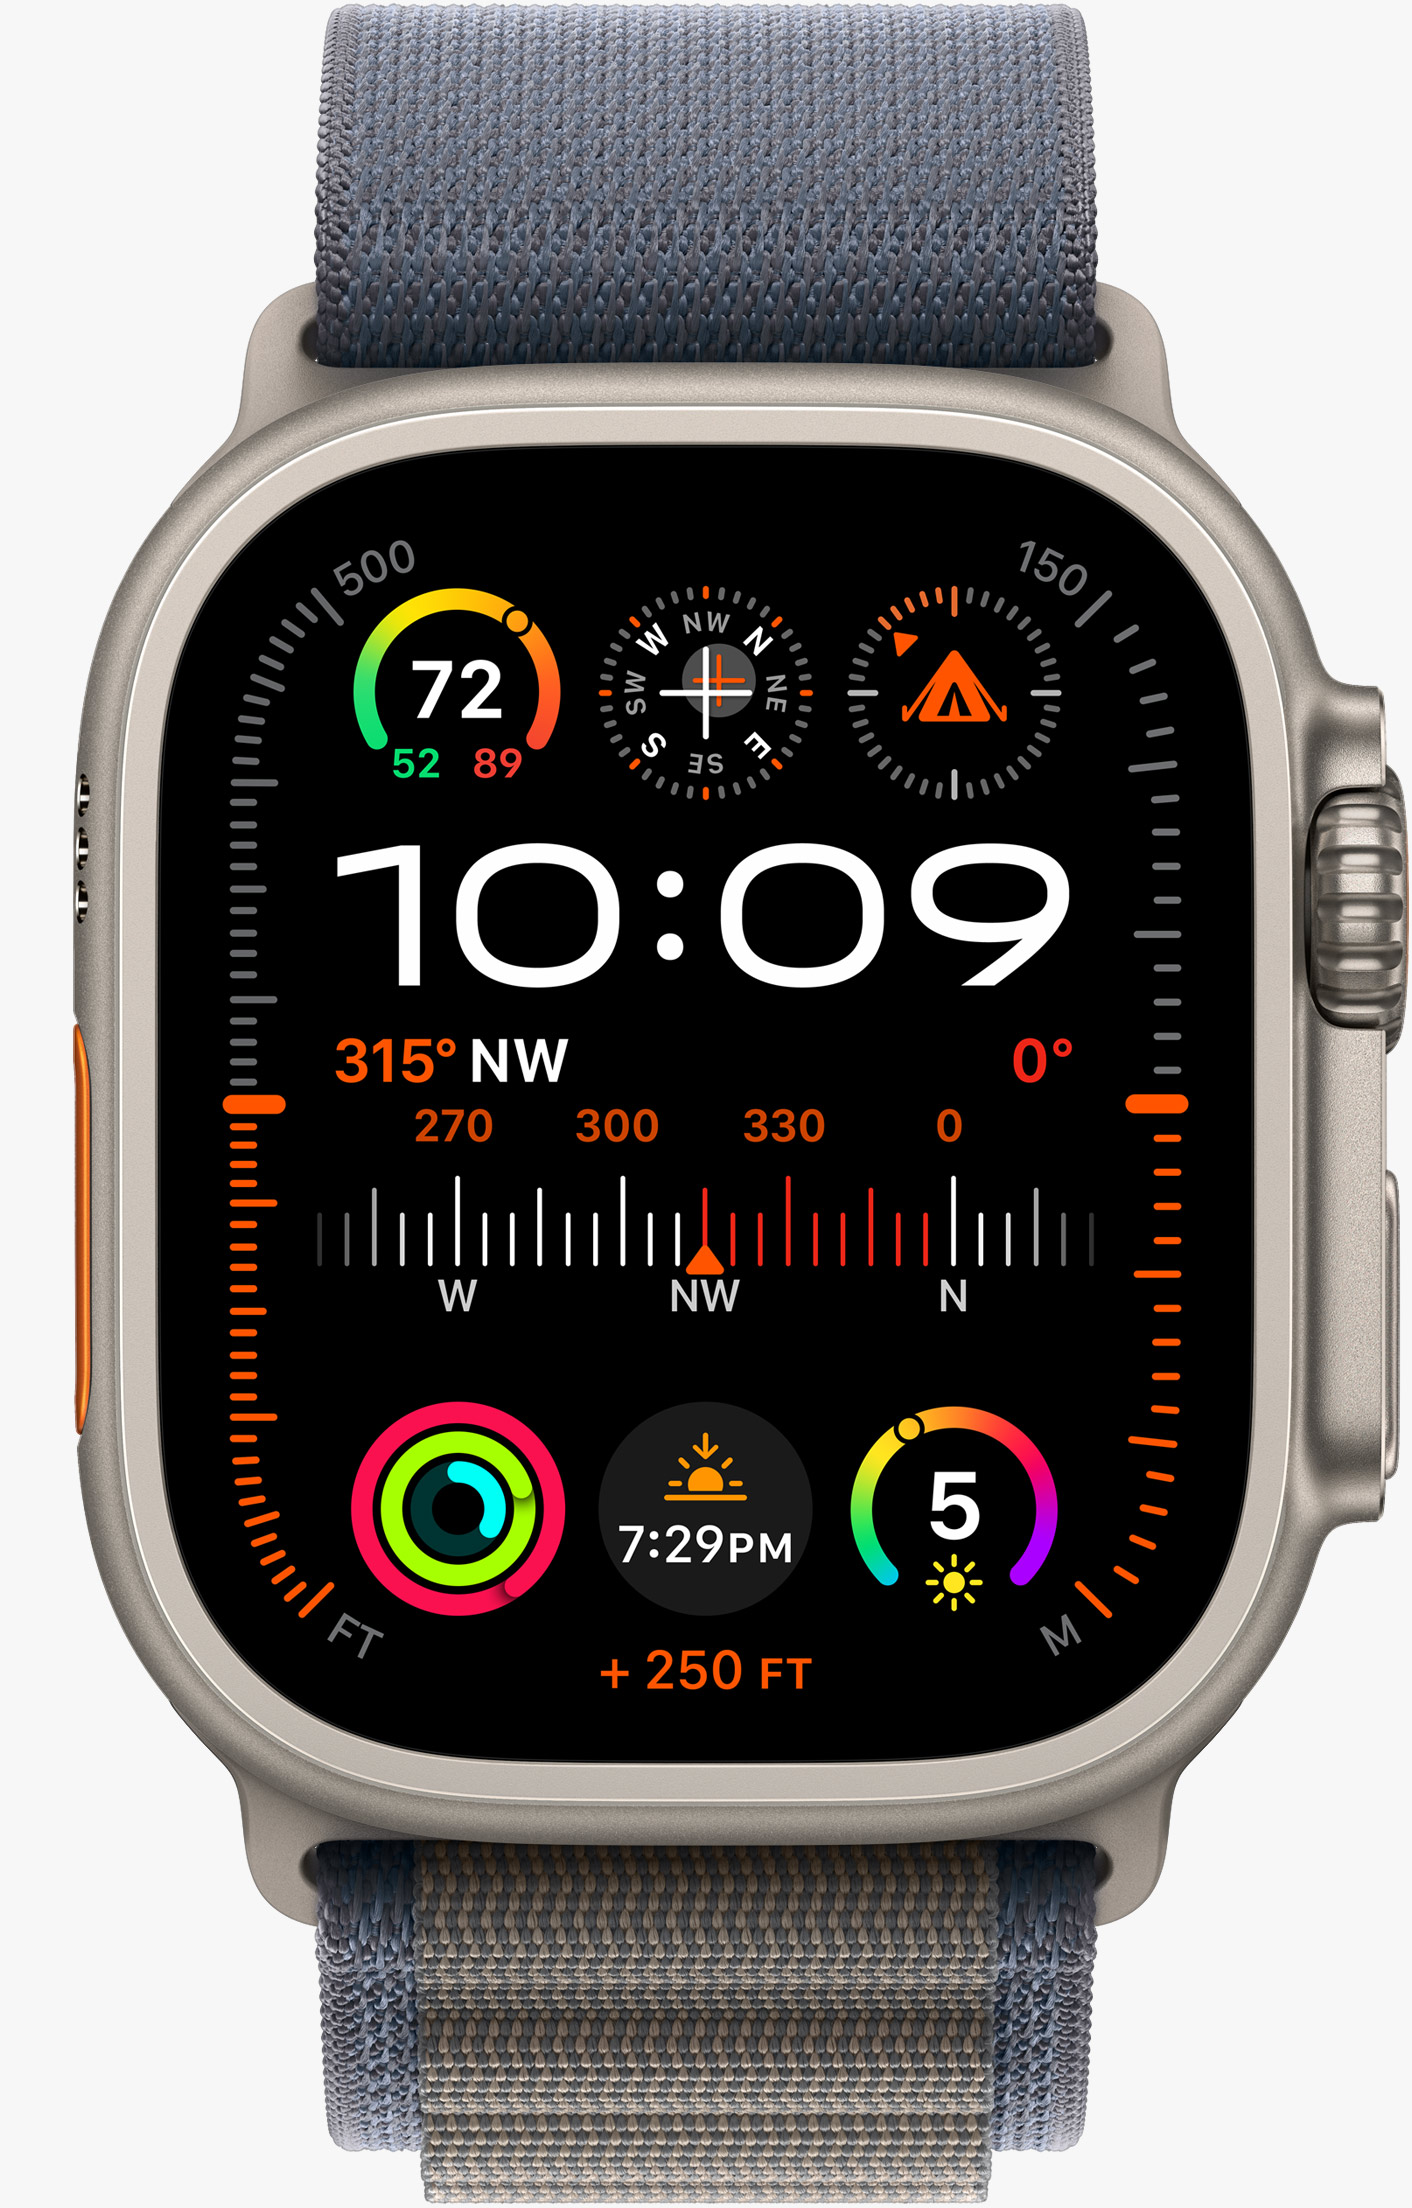 The biggest and brightest Apple Watch display